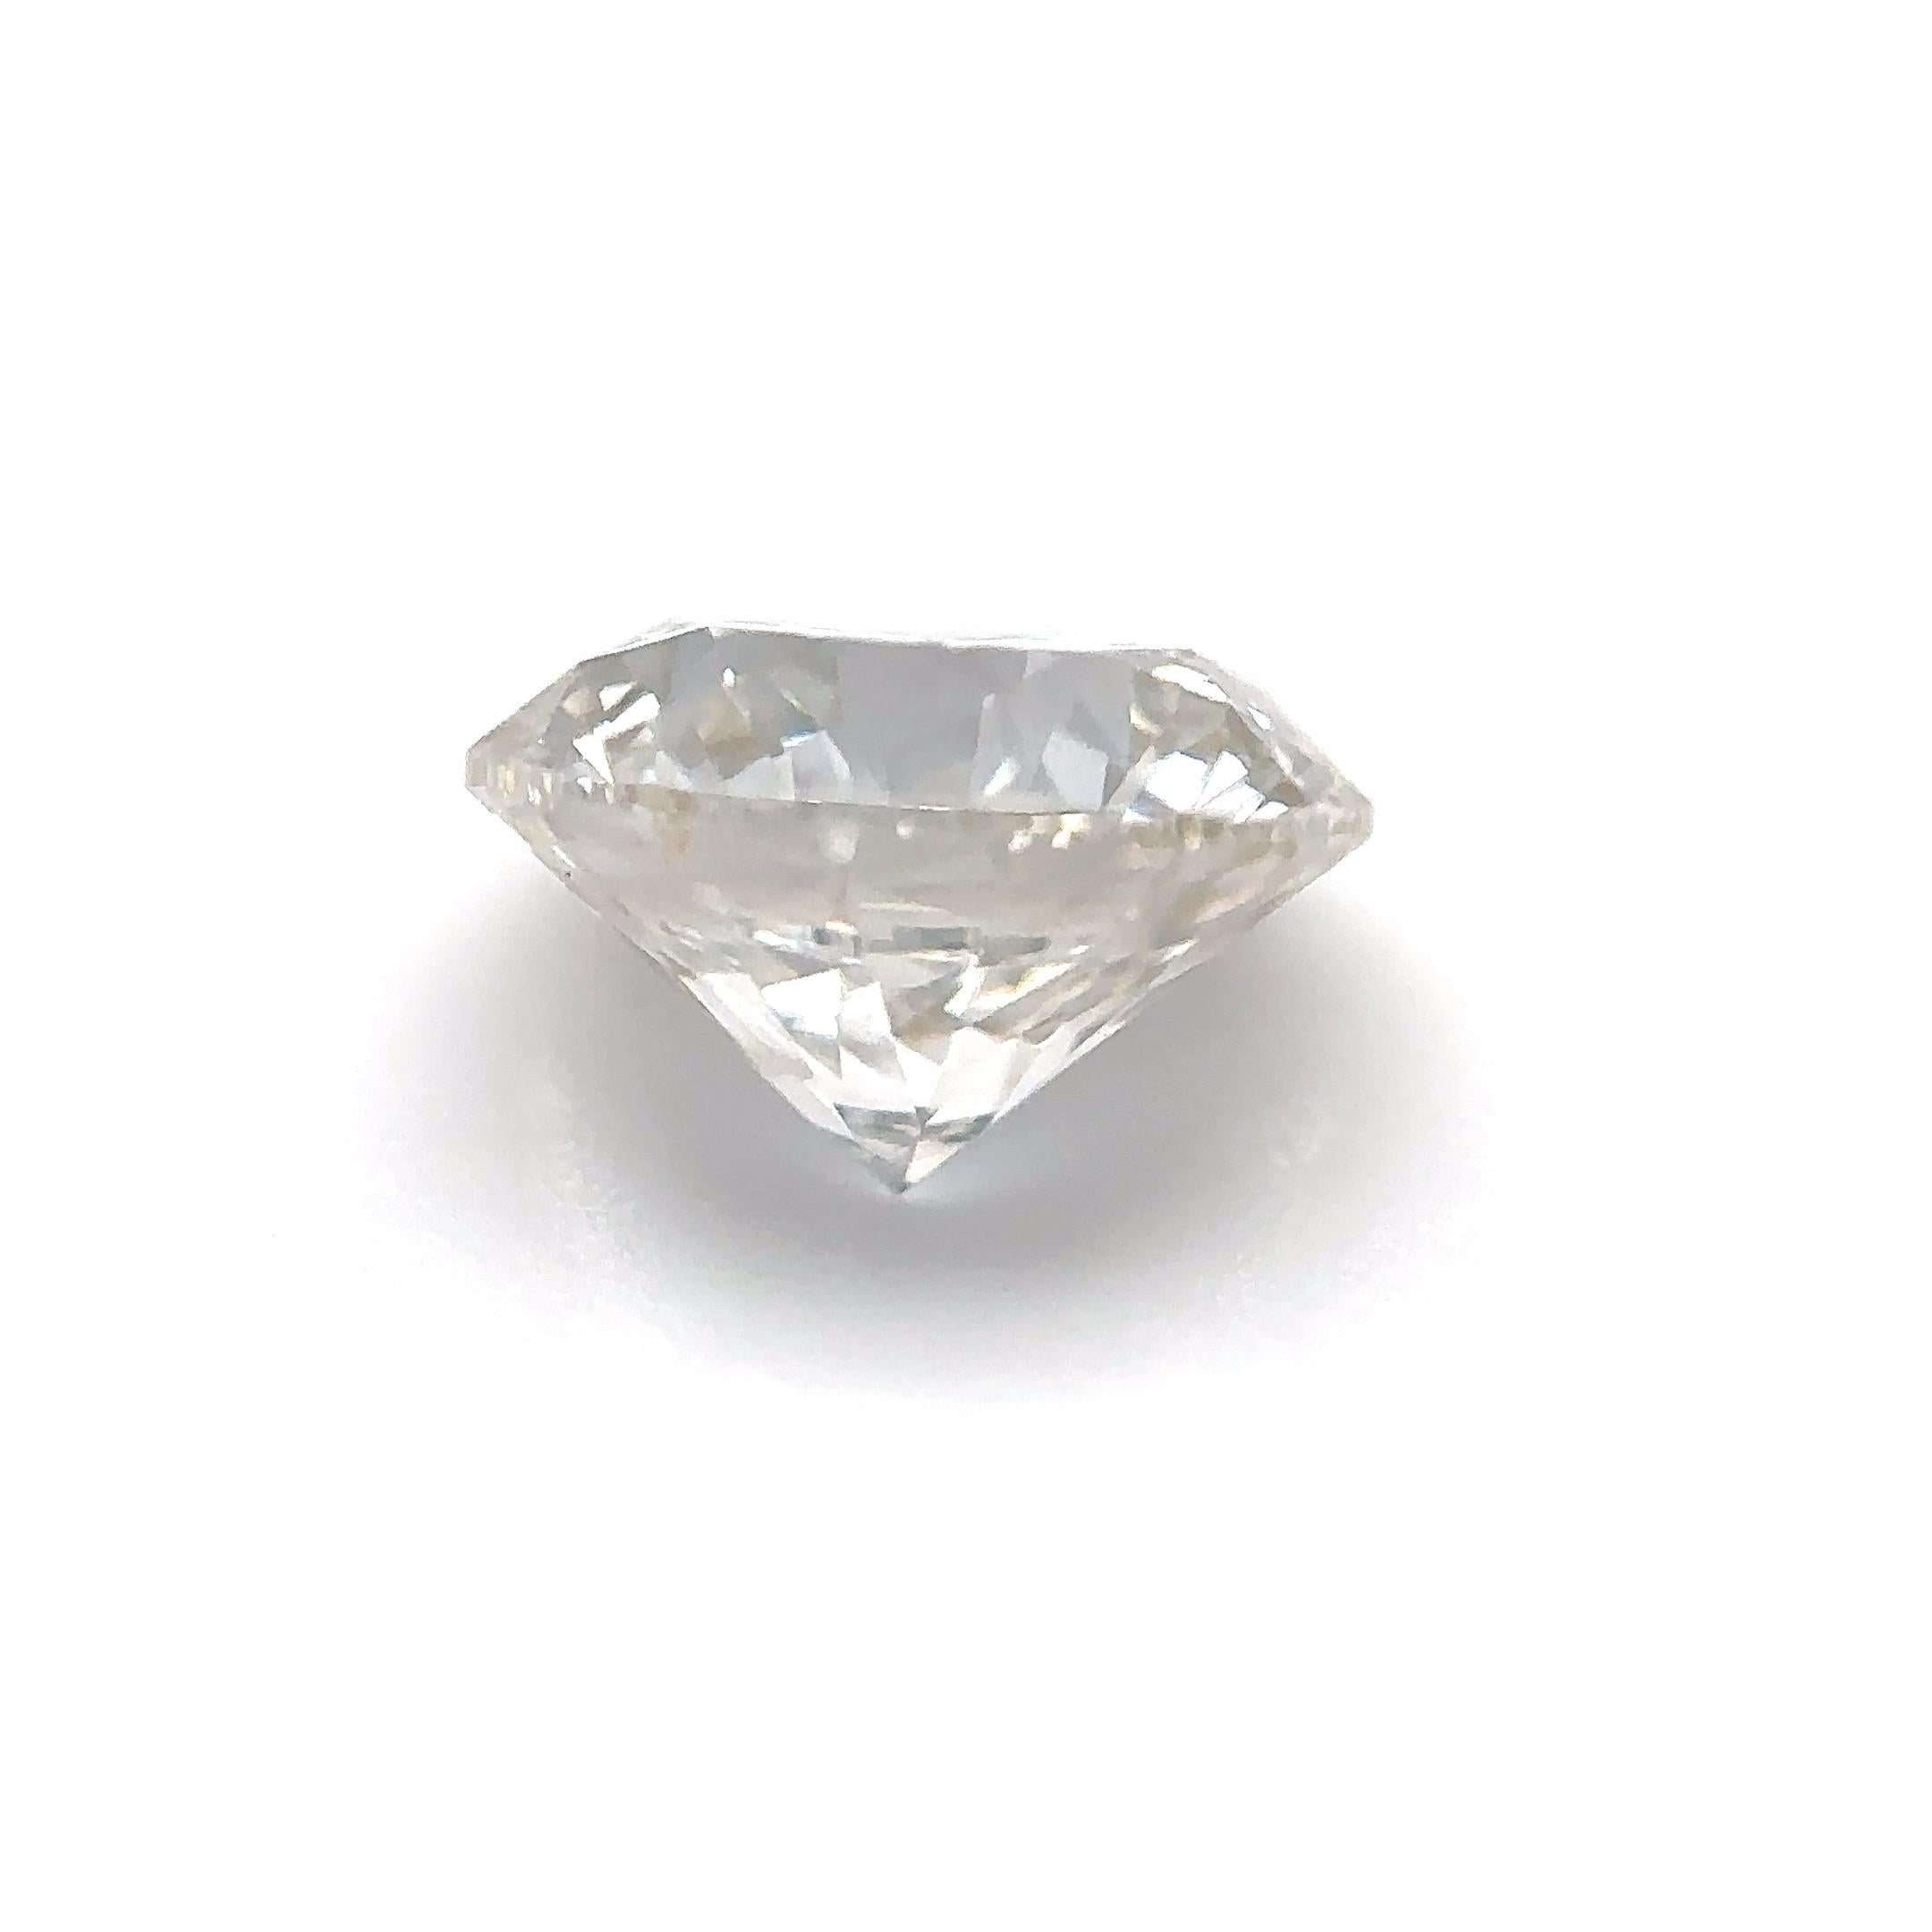 GIA Certified 1.01 Carat Round Brilliant Natural Diamond Loose Stone (Customization Option)

Color: J
Clarity: VS1

Ideal for engagement rings, wedding bands, diamond necklaces and diamond earrings. Get in touch with us to customise your jewellery!